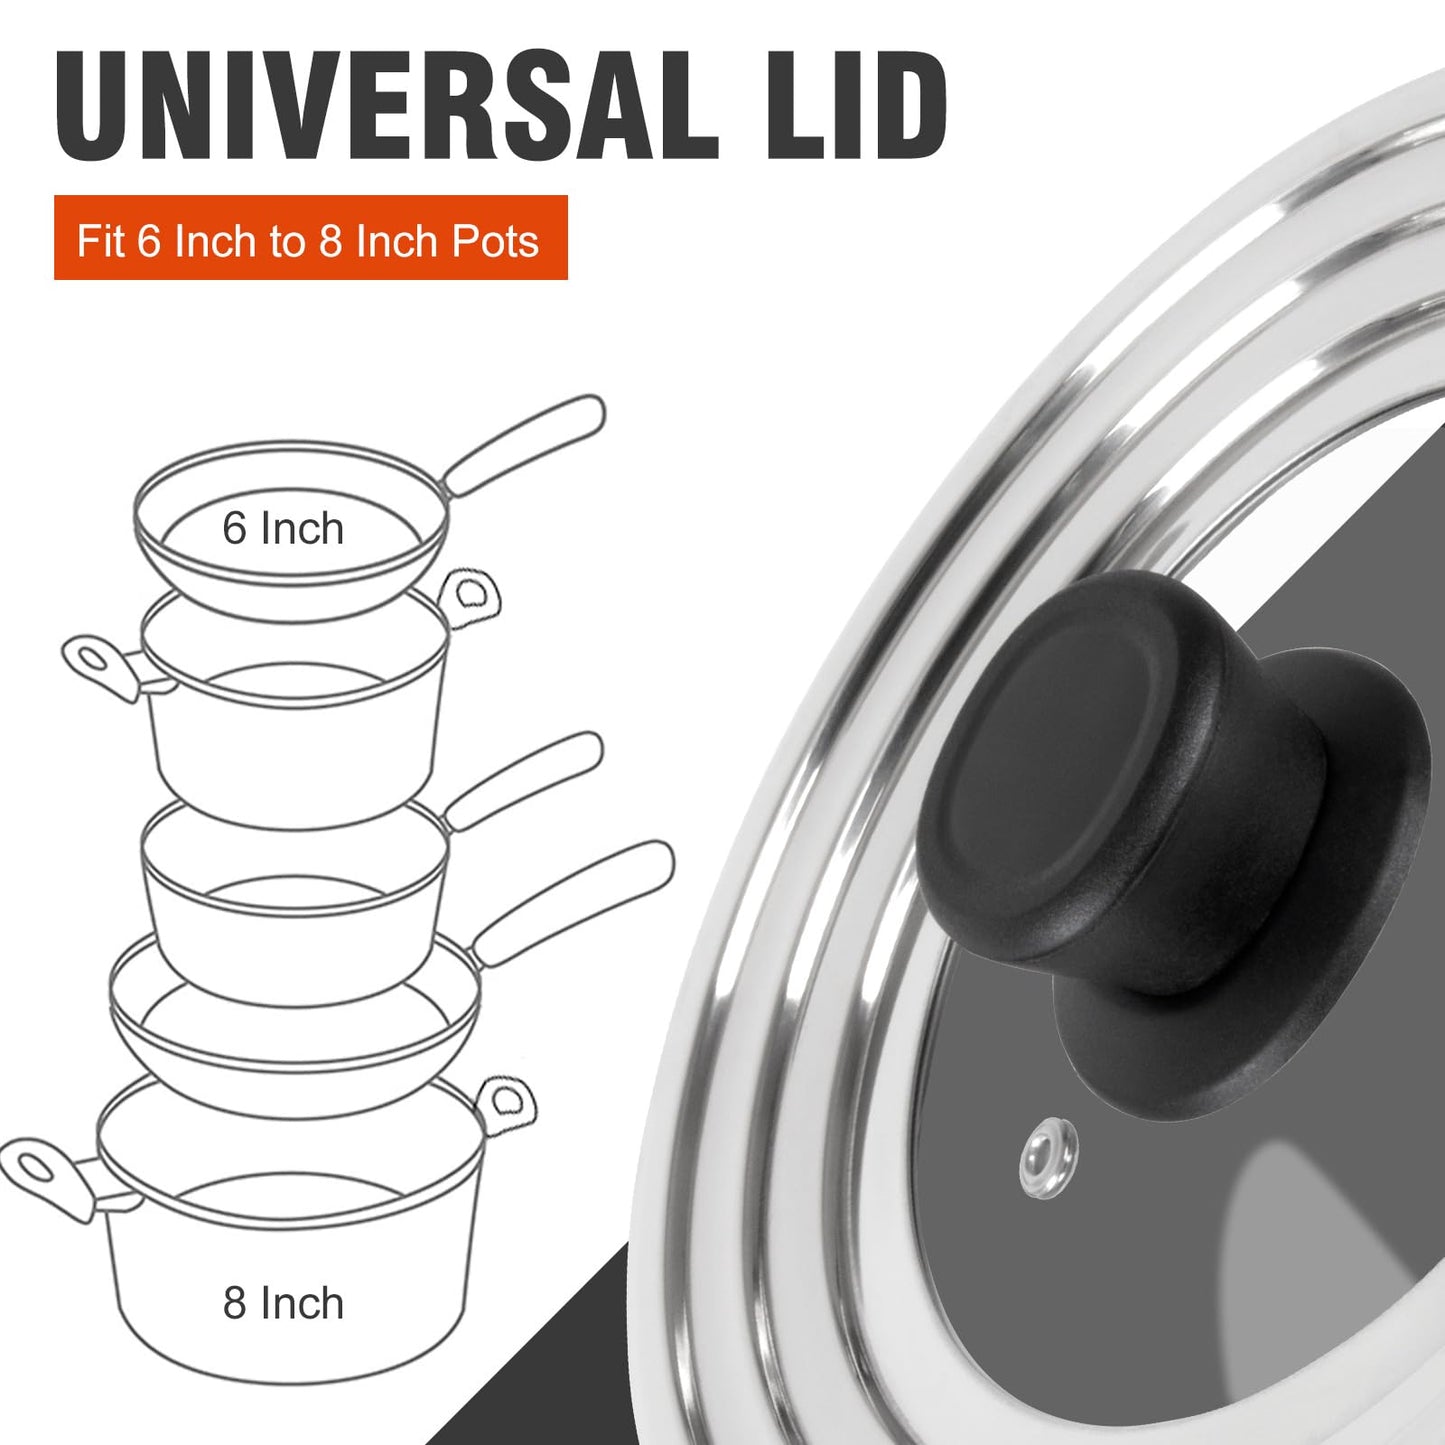 Universal Lid for Pots and Pans Skillets, Stainless Steel Pan Cover Fits 6-7-8 Inch Cookware, Large Replacement Frying Pan Cover, Cast Iron Skillet Pot Lids with Heat Resistant Knob